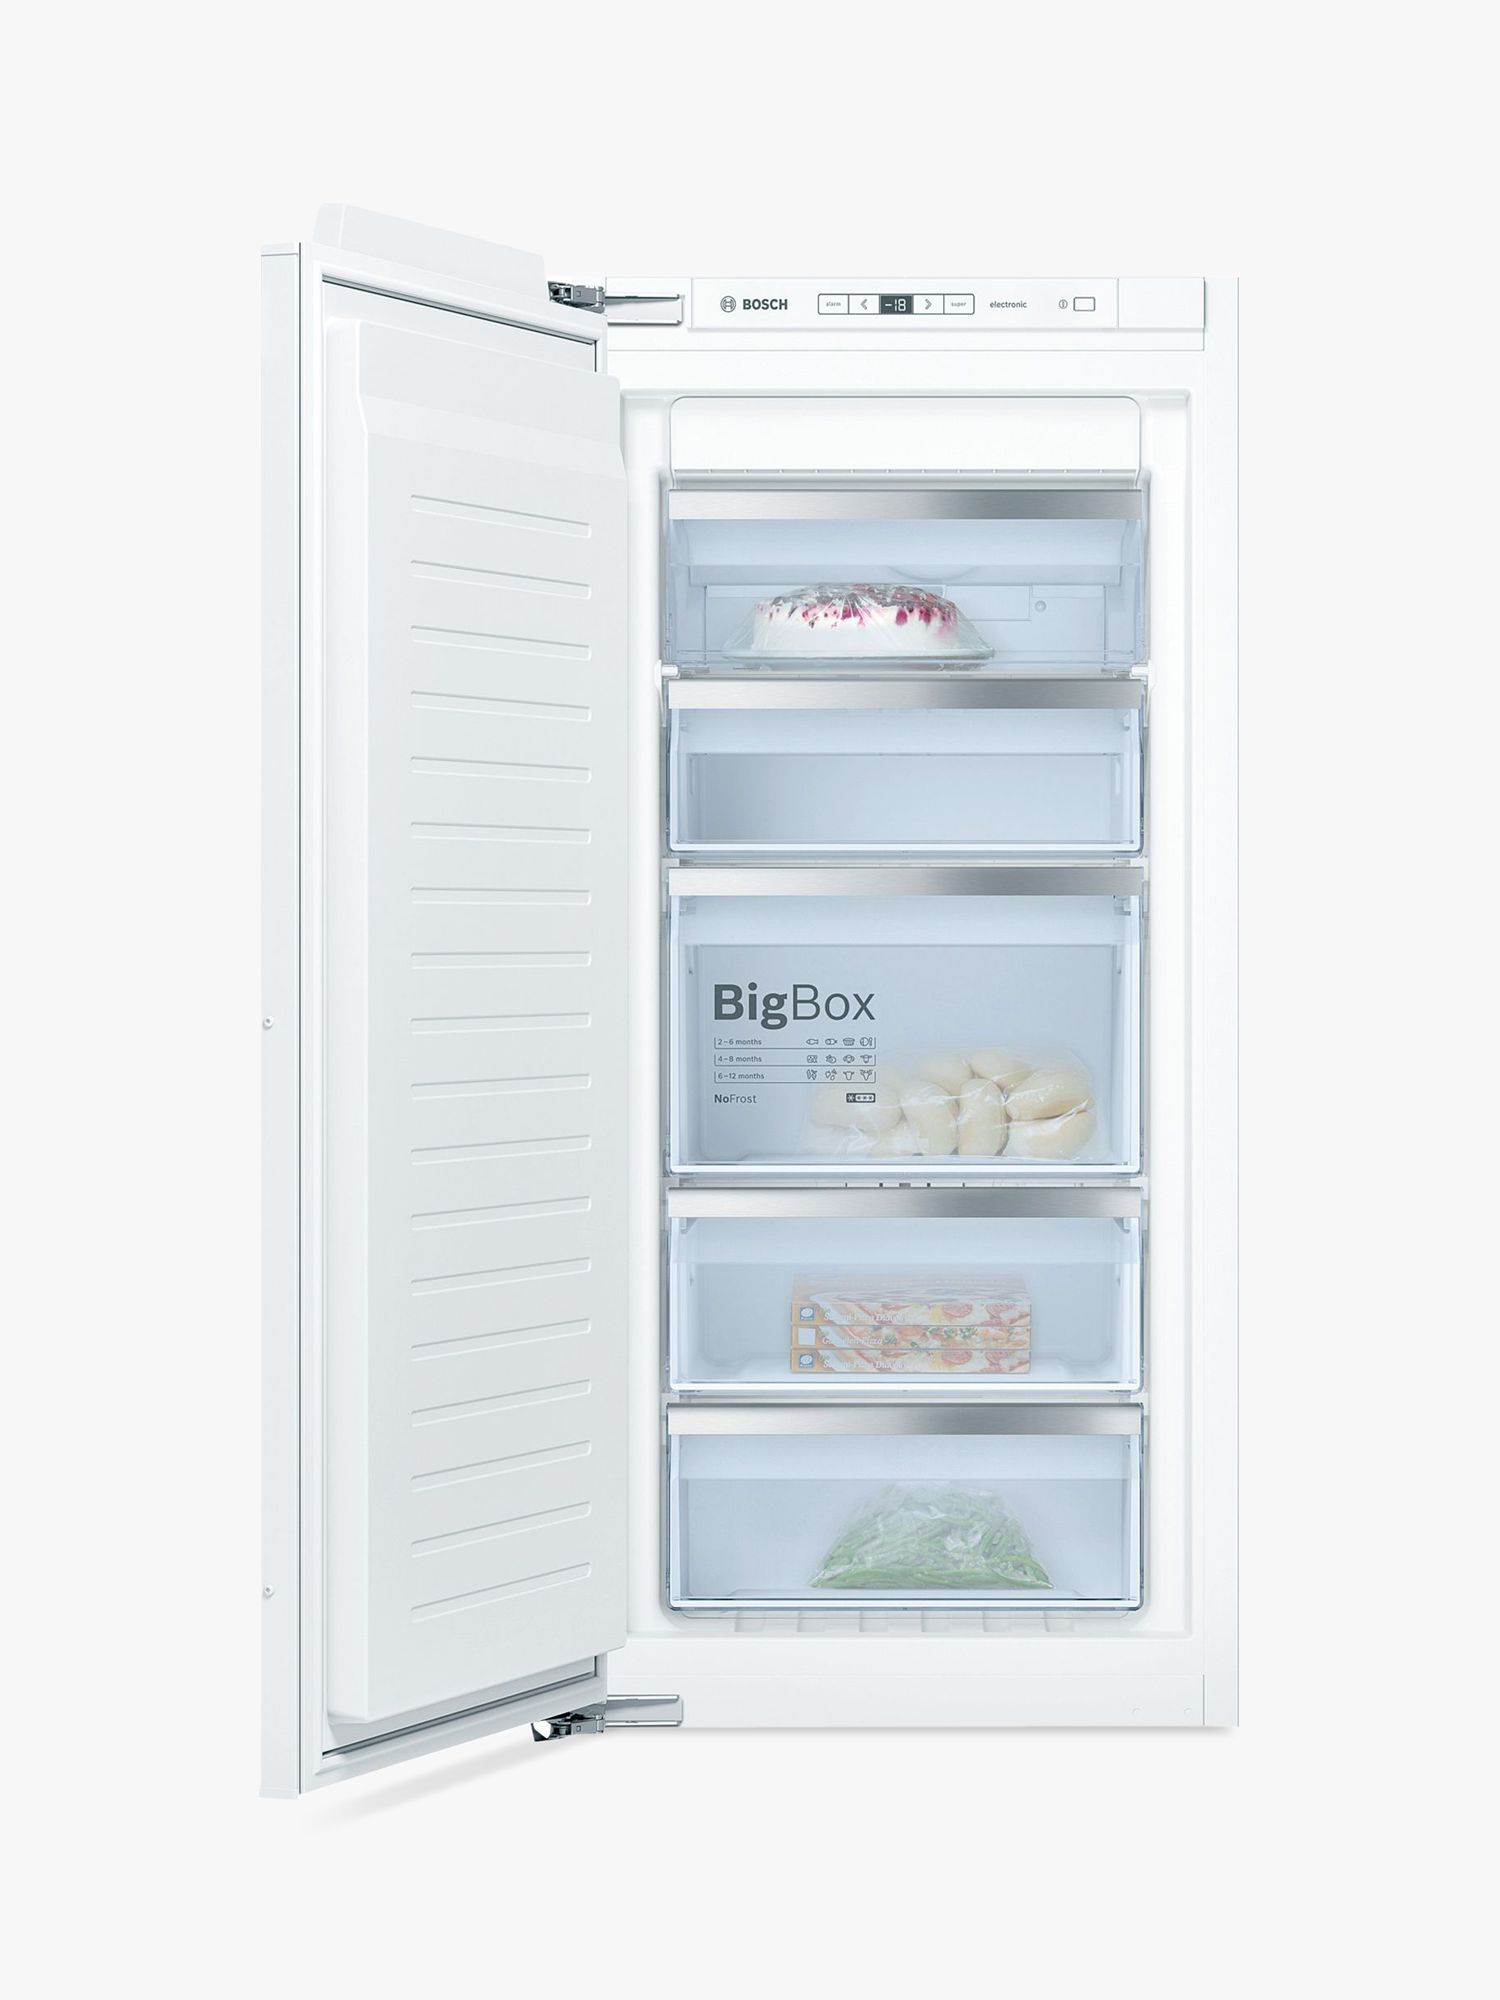 Bosch Serie 6 GIN41AE30G Integrated Built-In Freezer, A++ Energy Rating, White